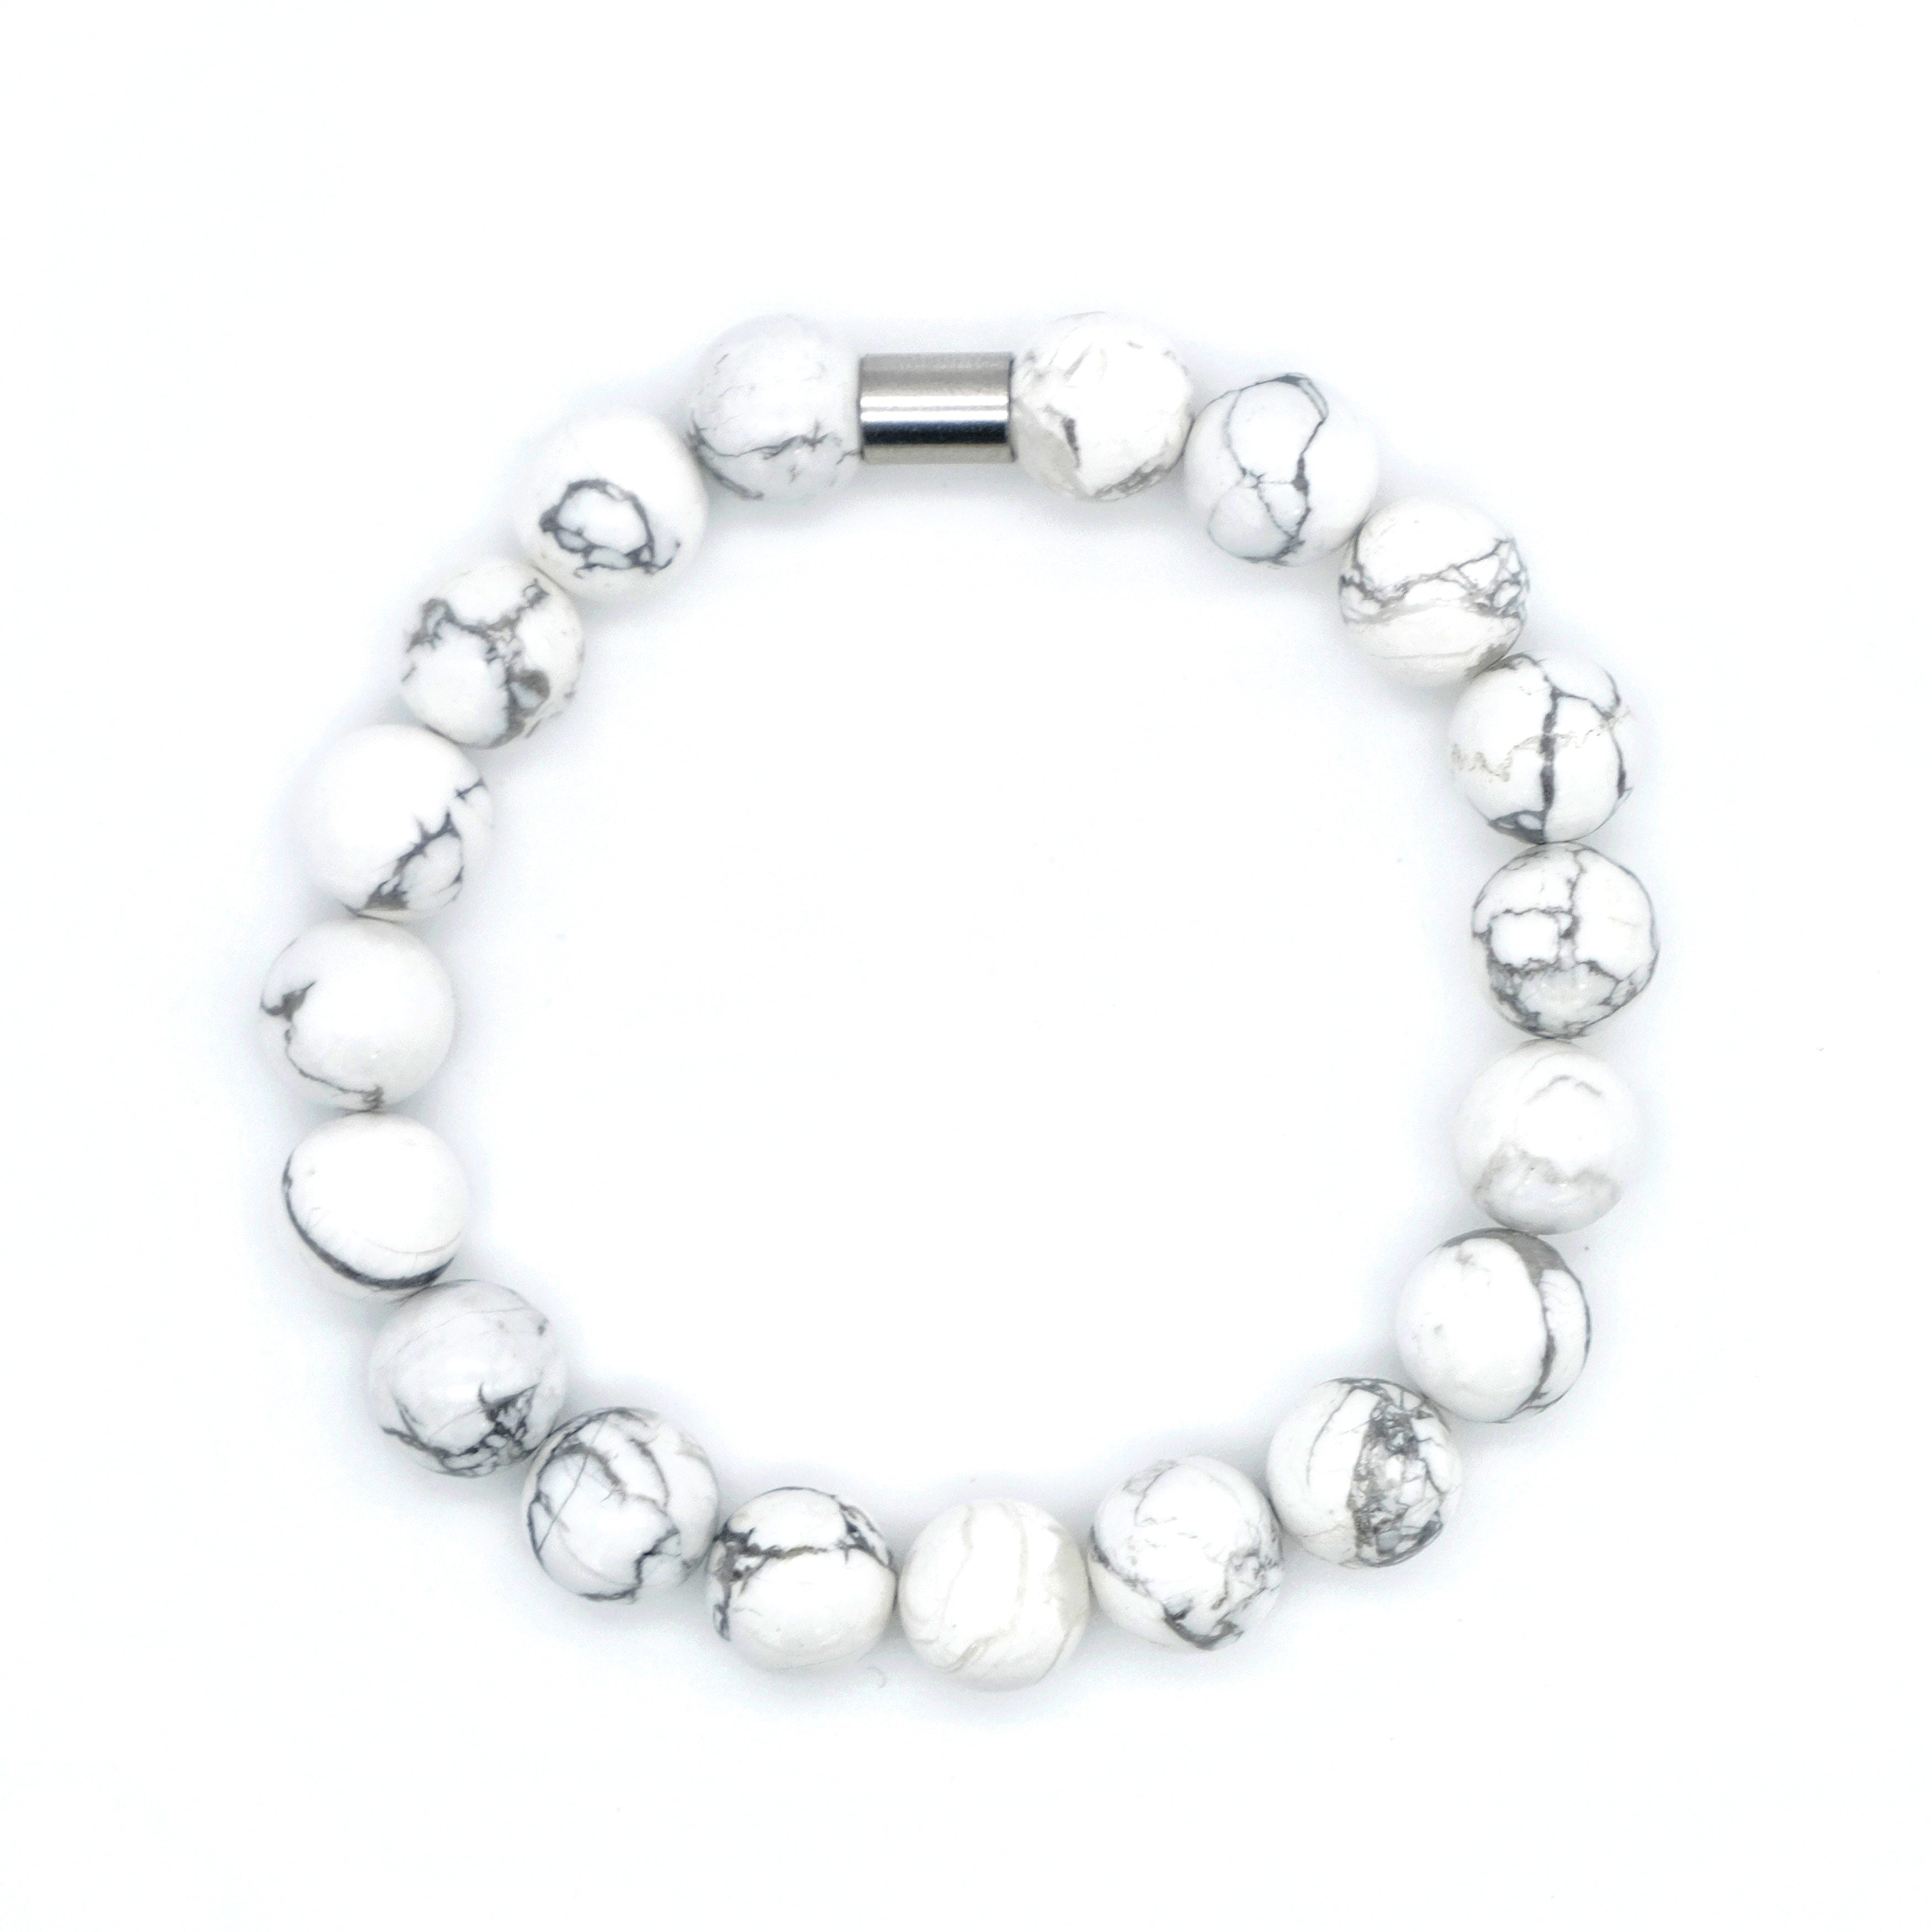 howlite gemstone bracelet in 10mm beads with stainless steel accessory from above